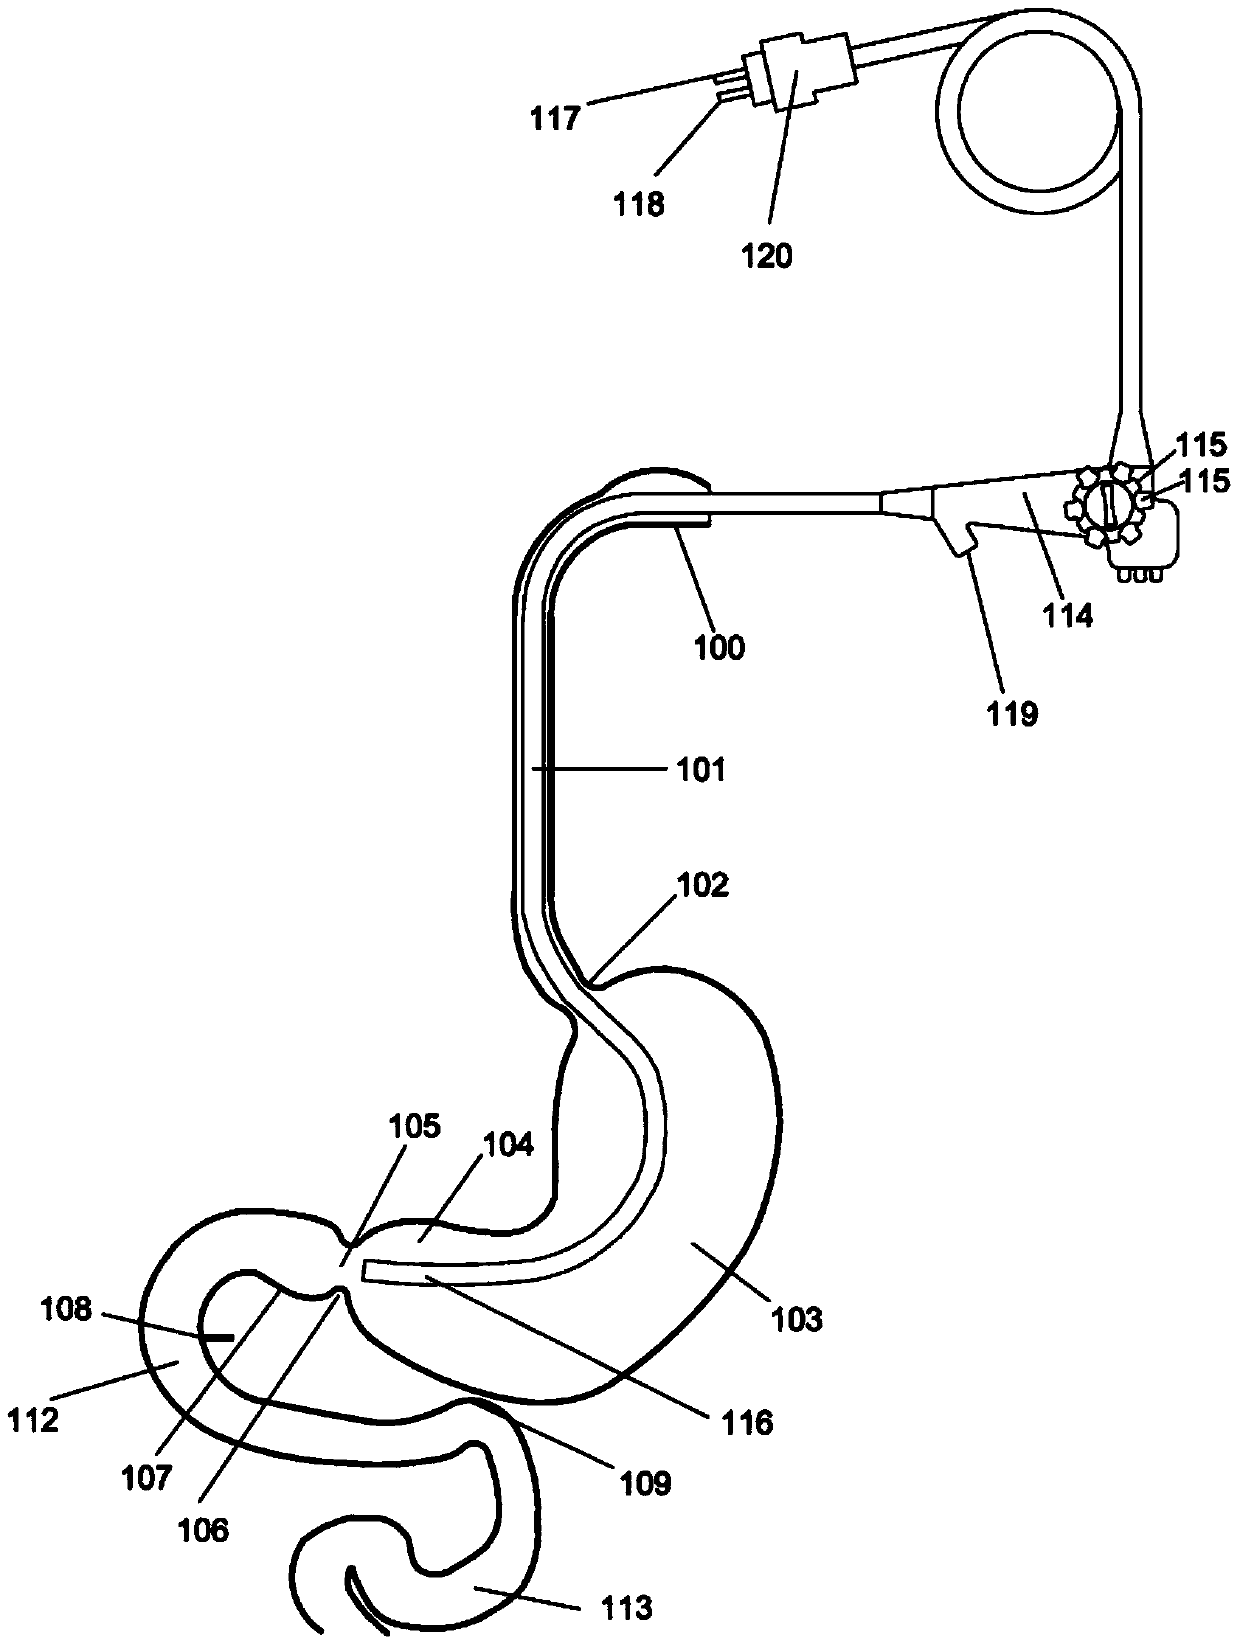 Anchors and methods for intestinal bypass sleeves